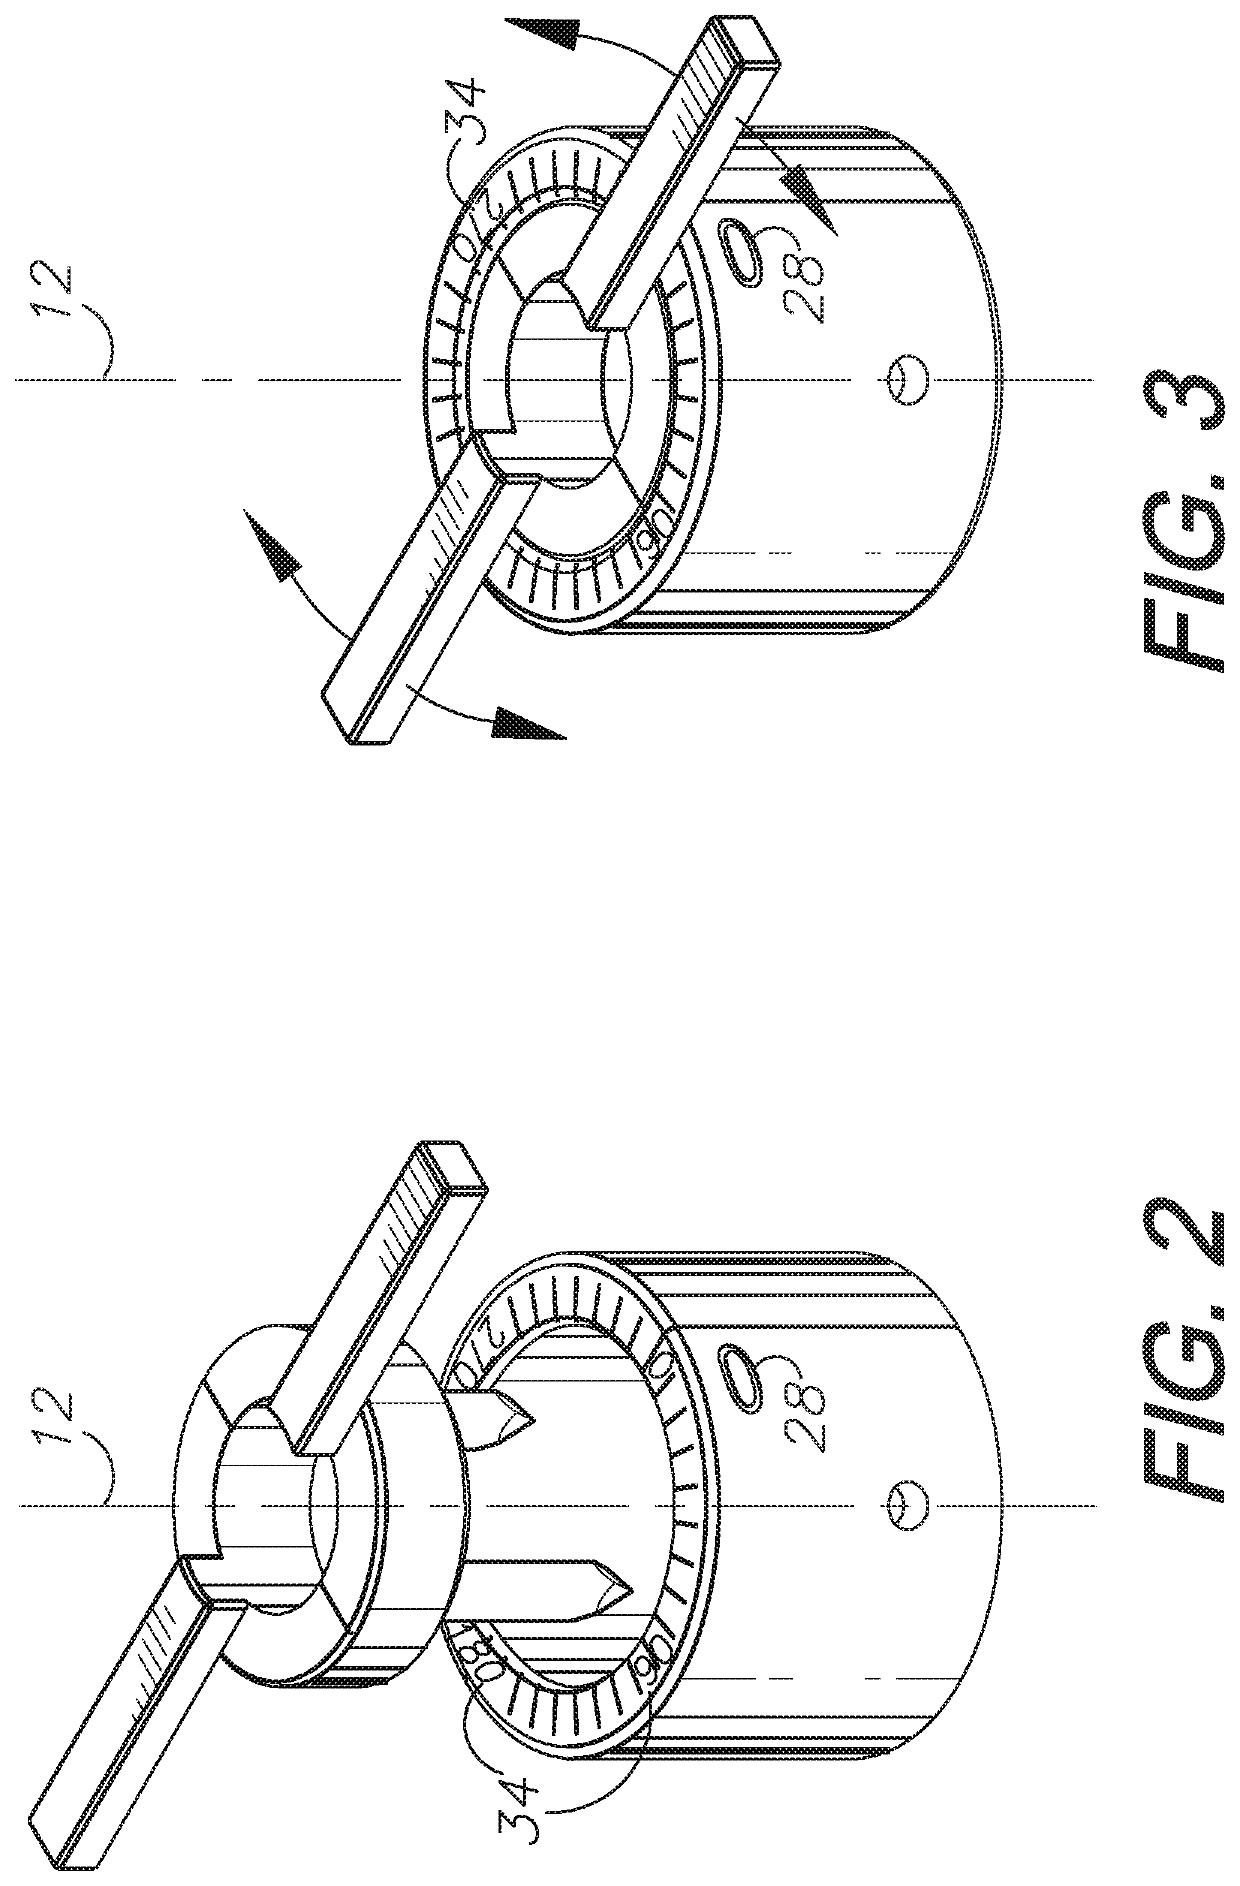 Ophthalmic incisional procedure instrument and method